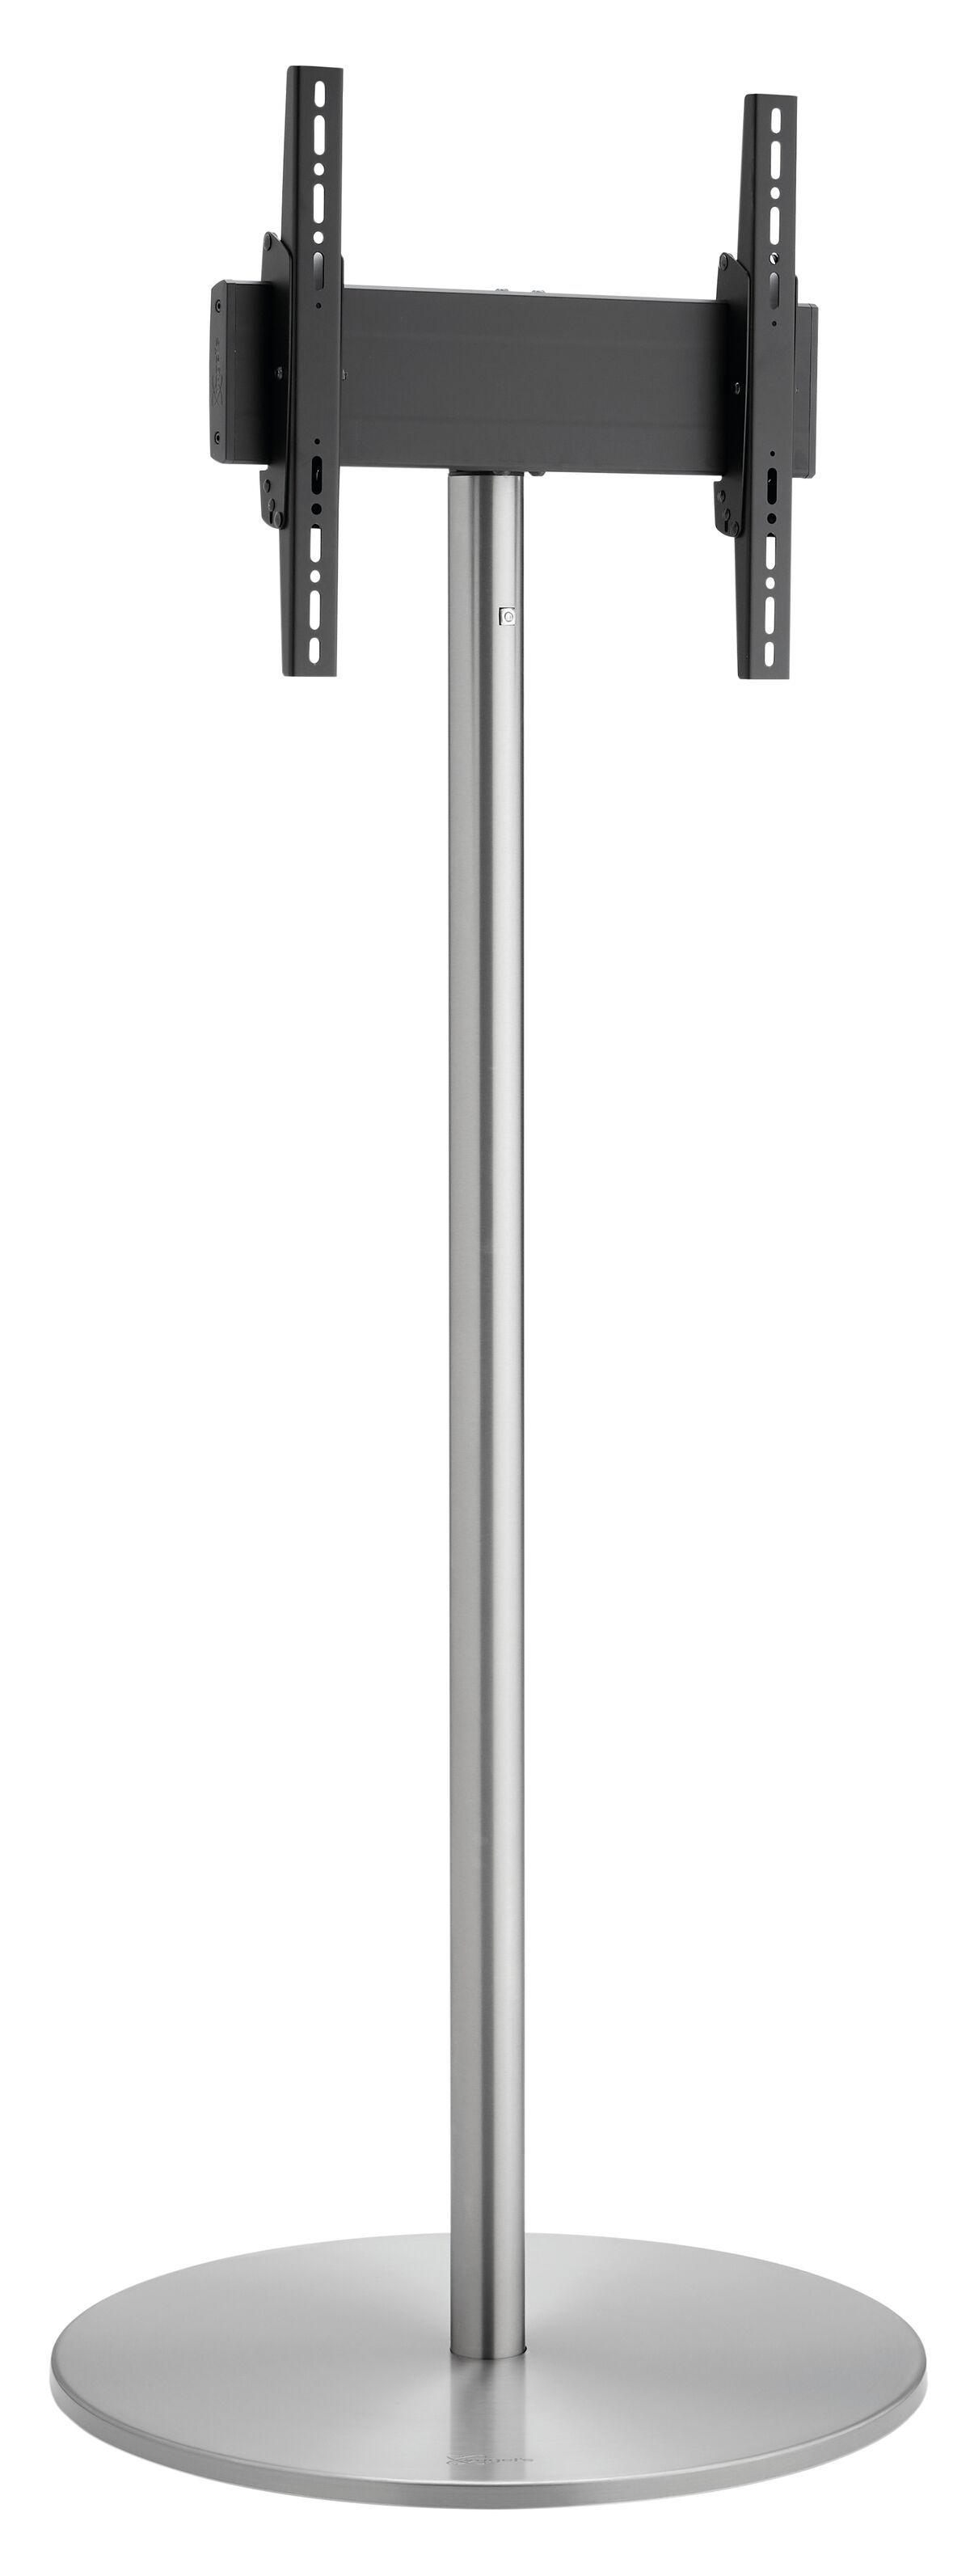 Vogel's F1622RVS Floor stand - Product